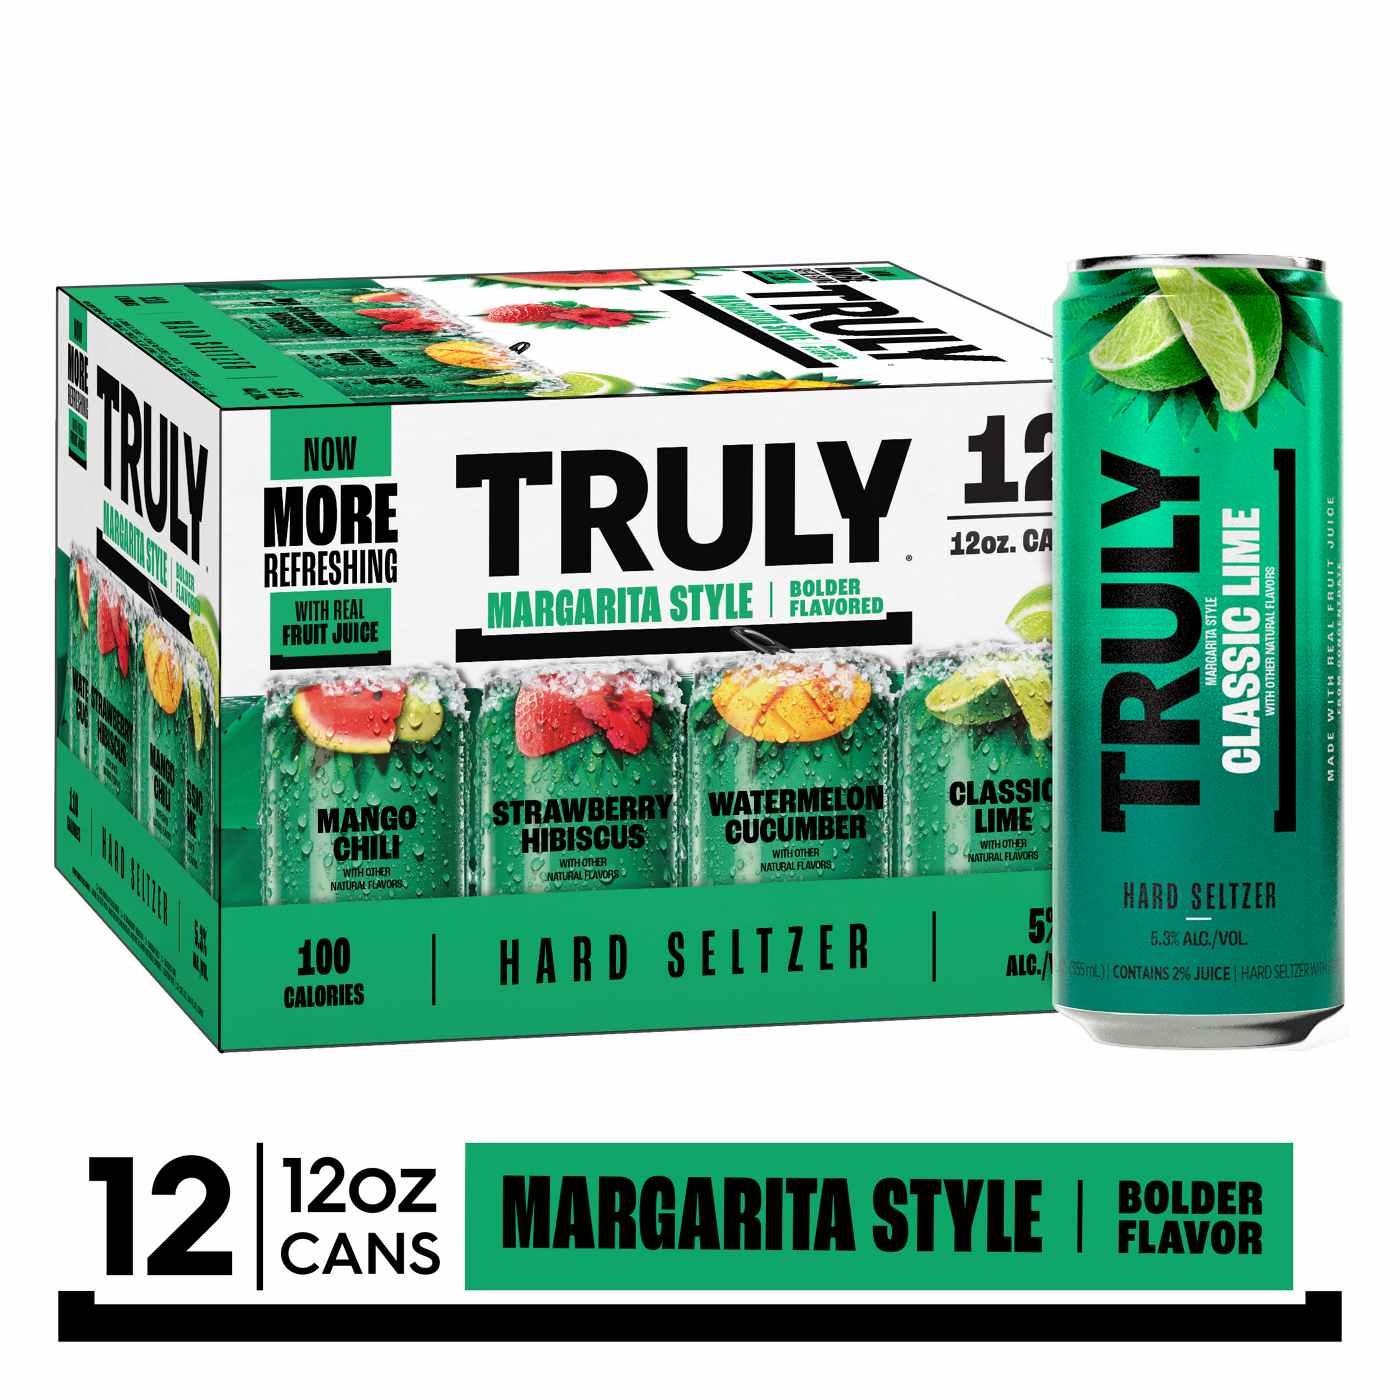 Truly Hard Seltzer Margarita Style Variety Mix Pack 12 pk Cans; image 2 of 2